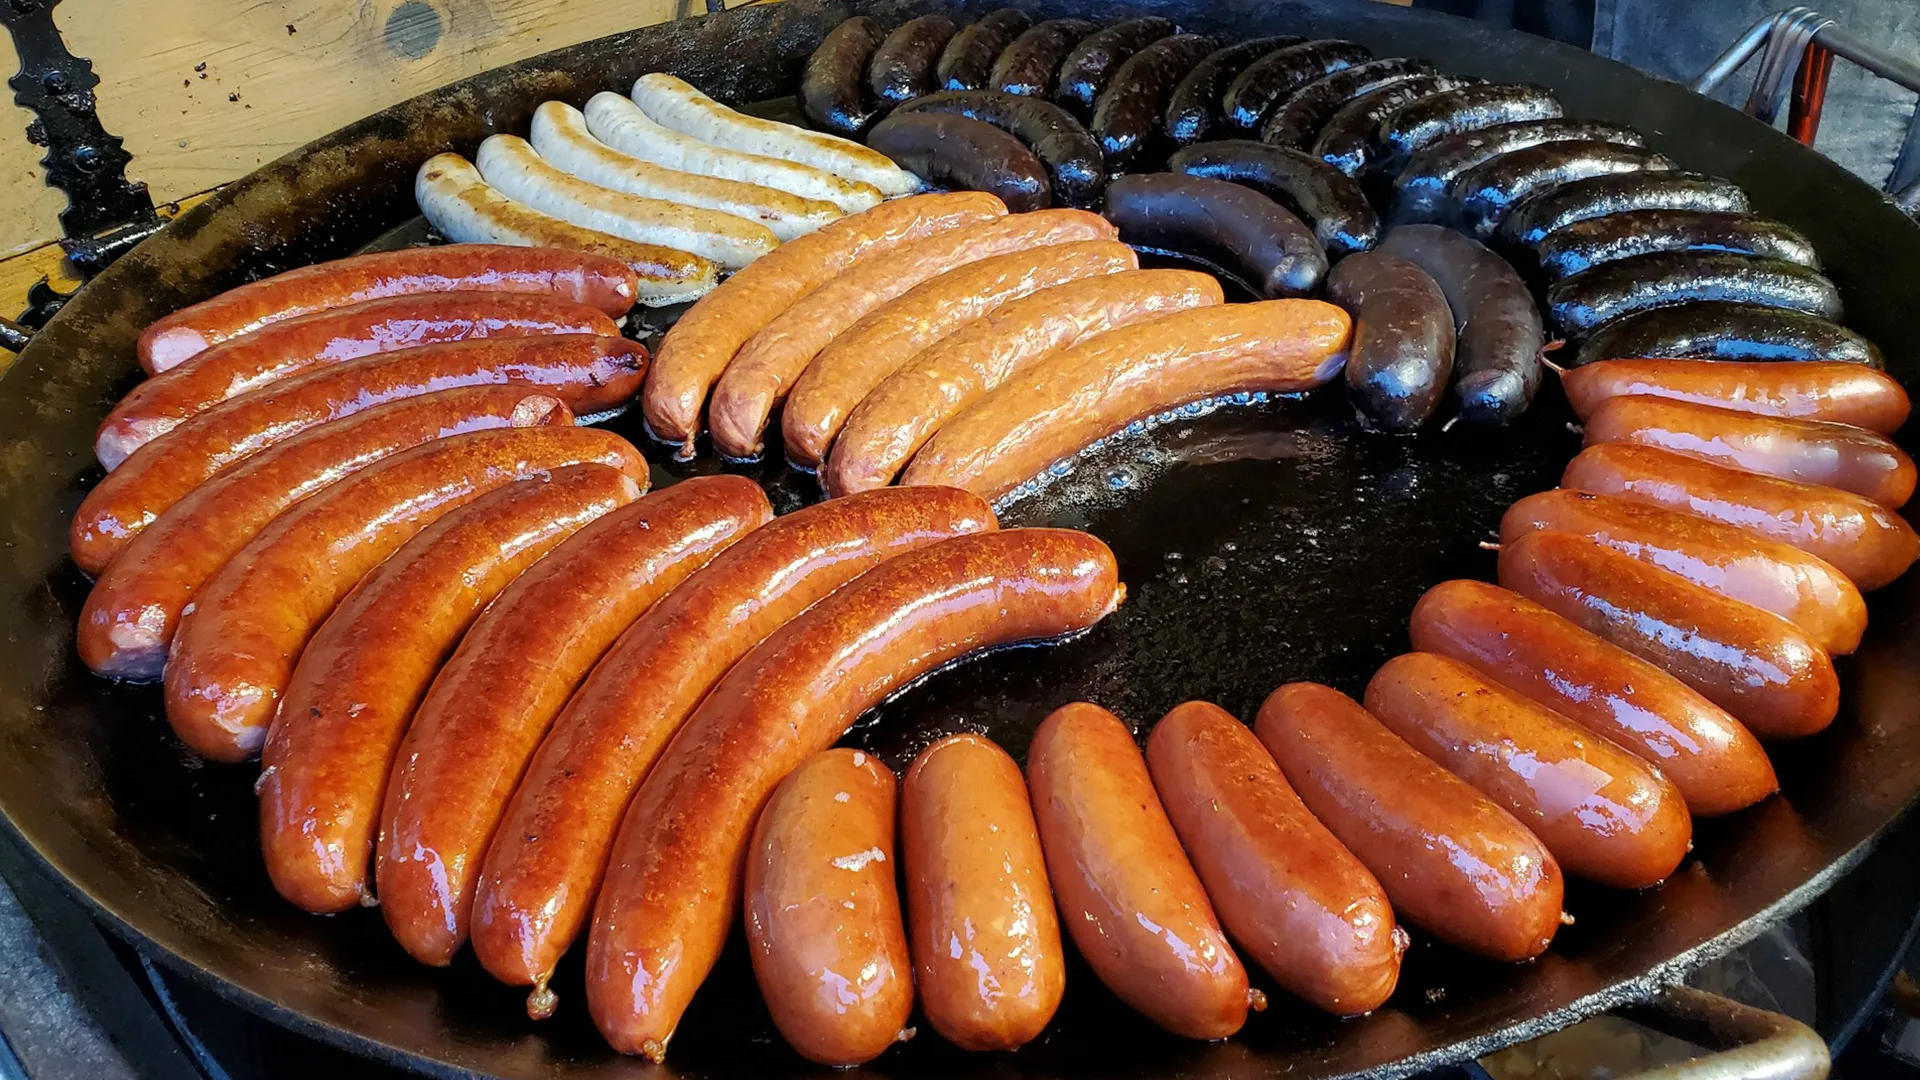 Sausages sizzling on a large round grill